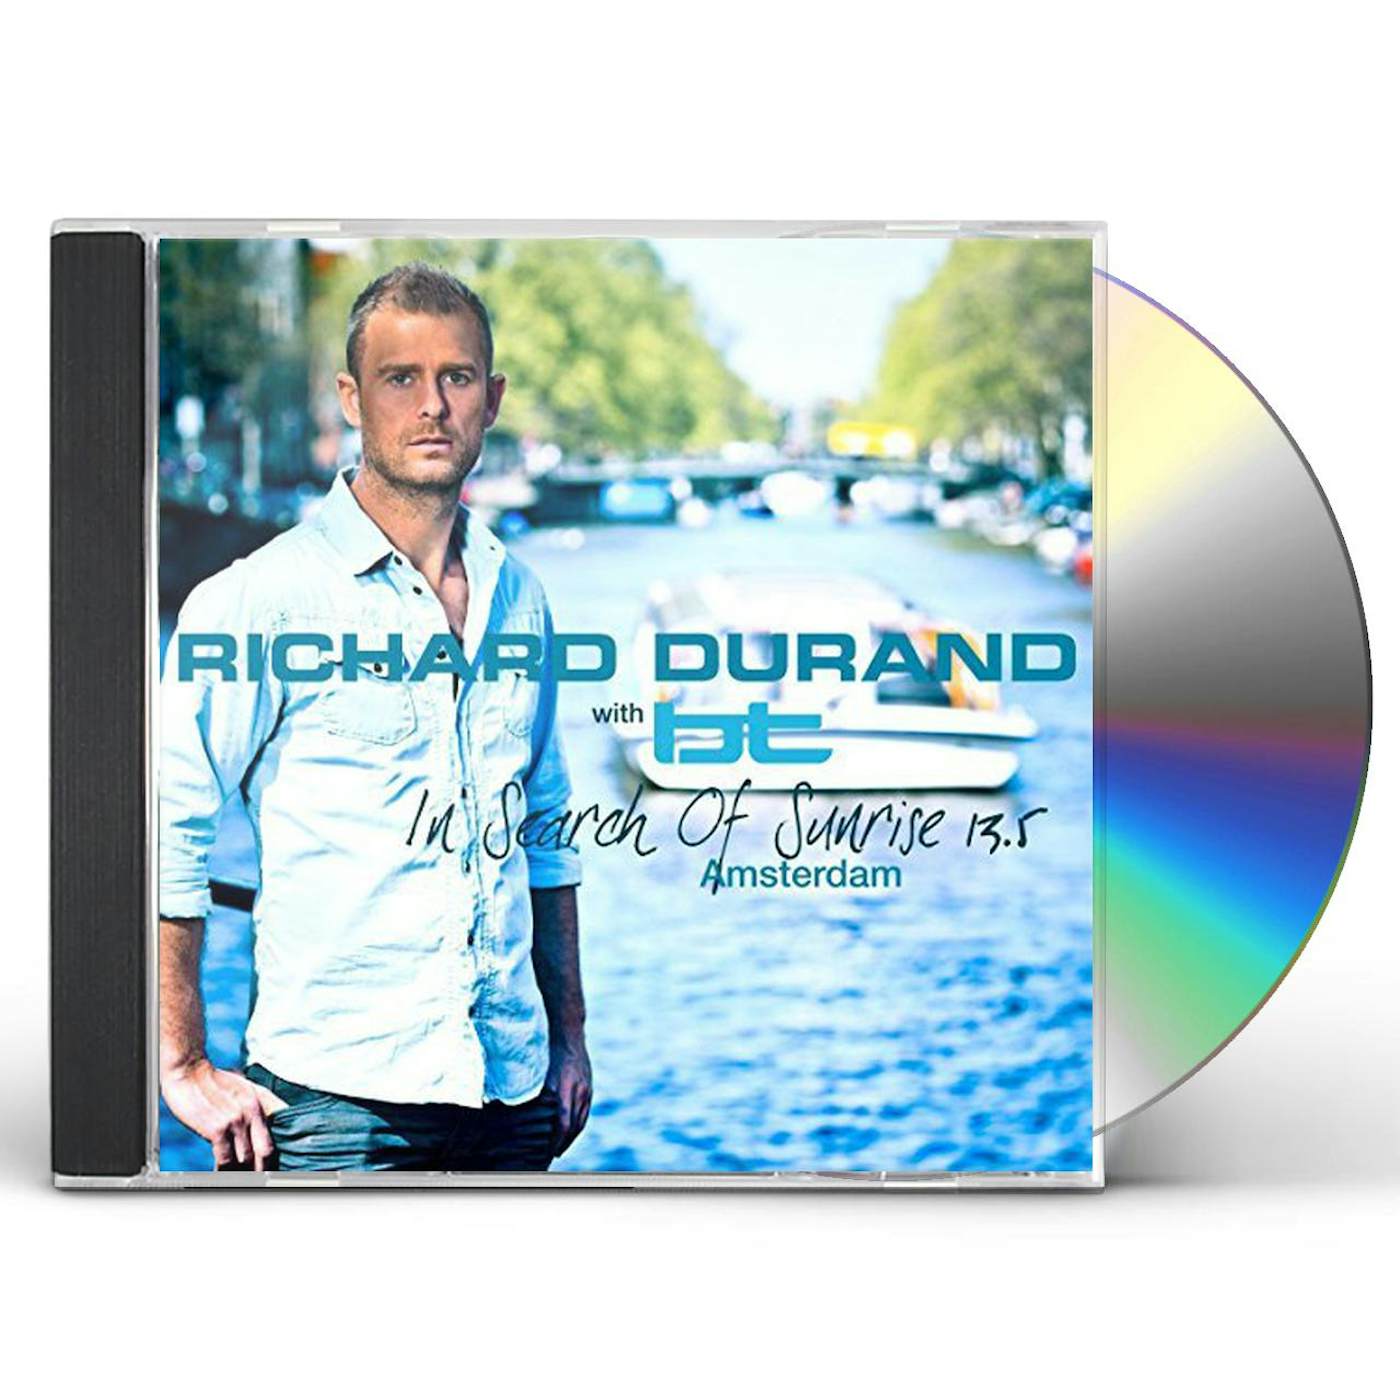 Richard Durand IN SEARCH OF SUNRISE 13.5 AMSTERDAM CD